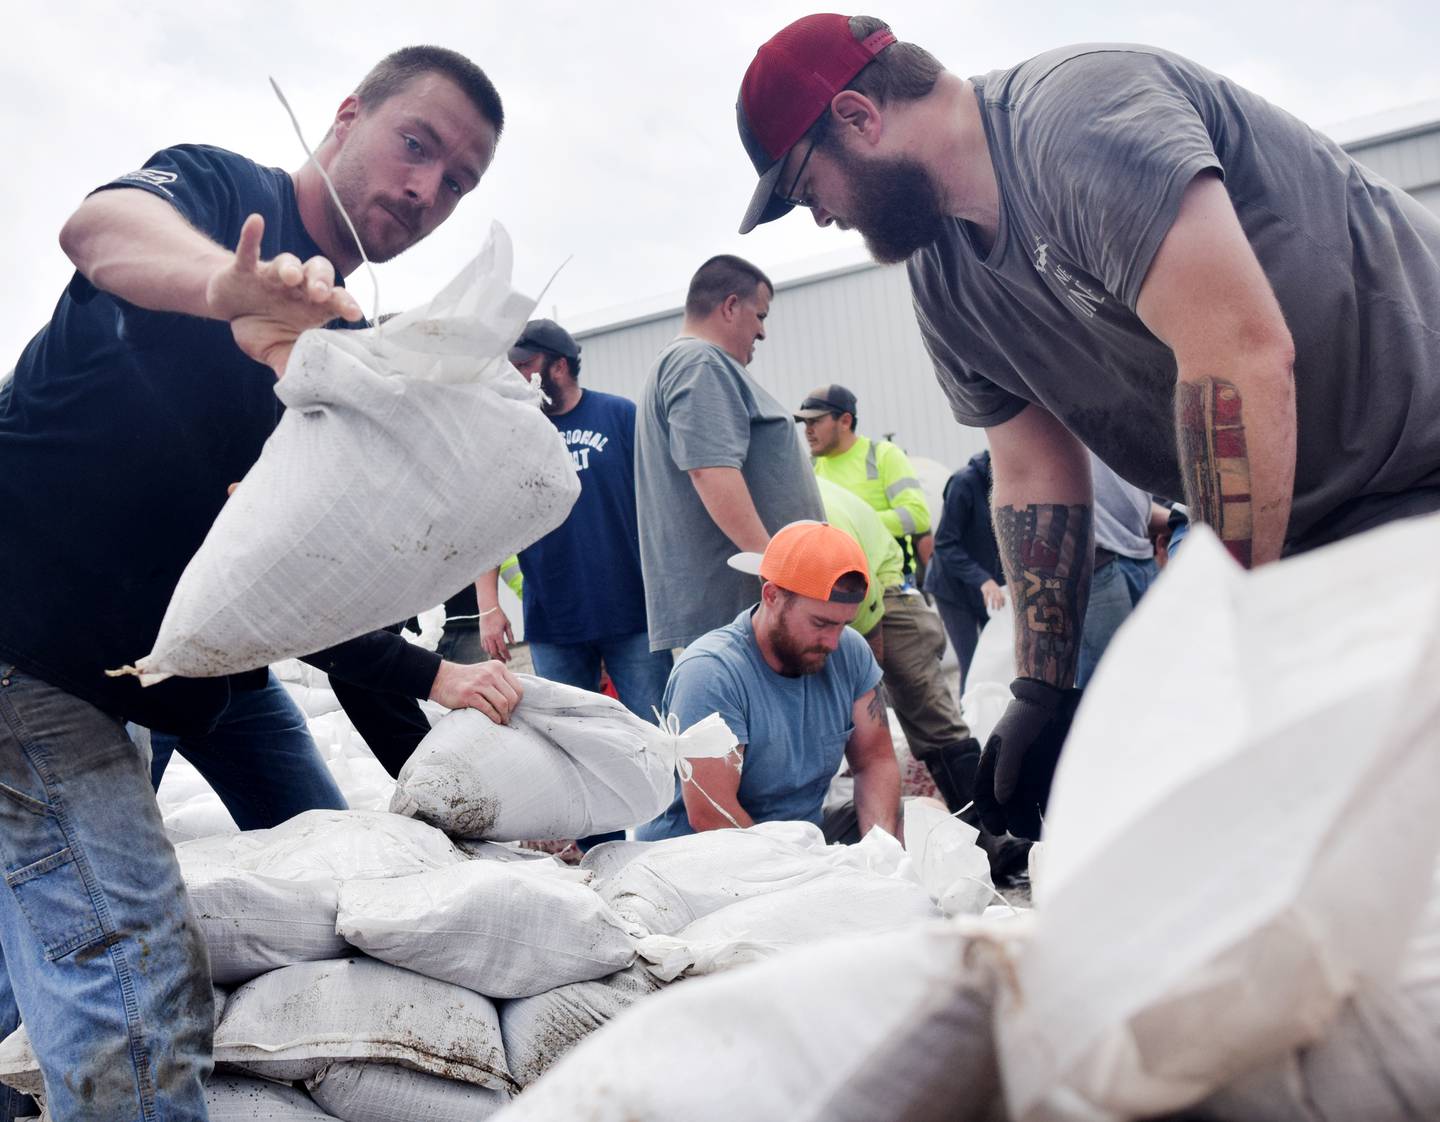 Volunteers on May 21 haul sandbags to be used in areas of Kellogg after the town had been hit with severe flooding, the waters of which had completely covered Holmdahl park, compromised a lift station and overflowed onto Iowa Highway 224, the road that leads into town.